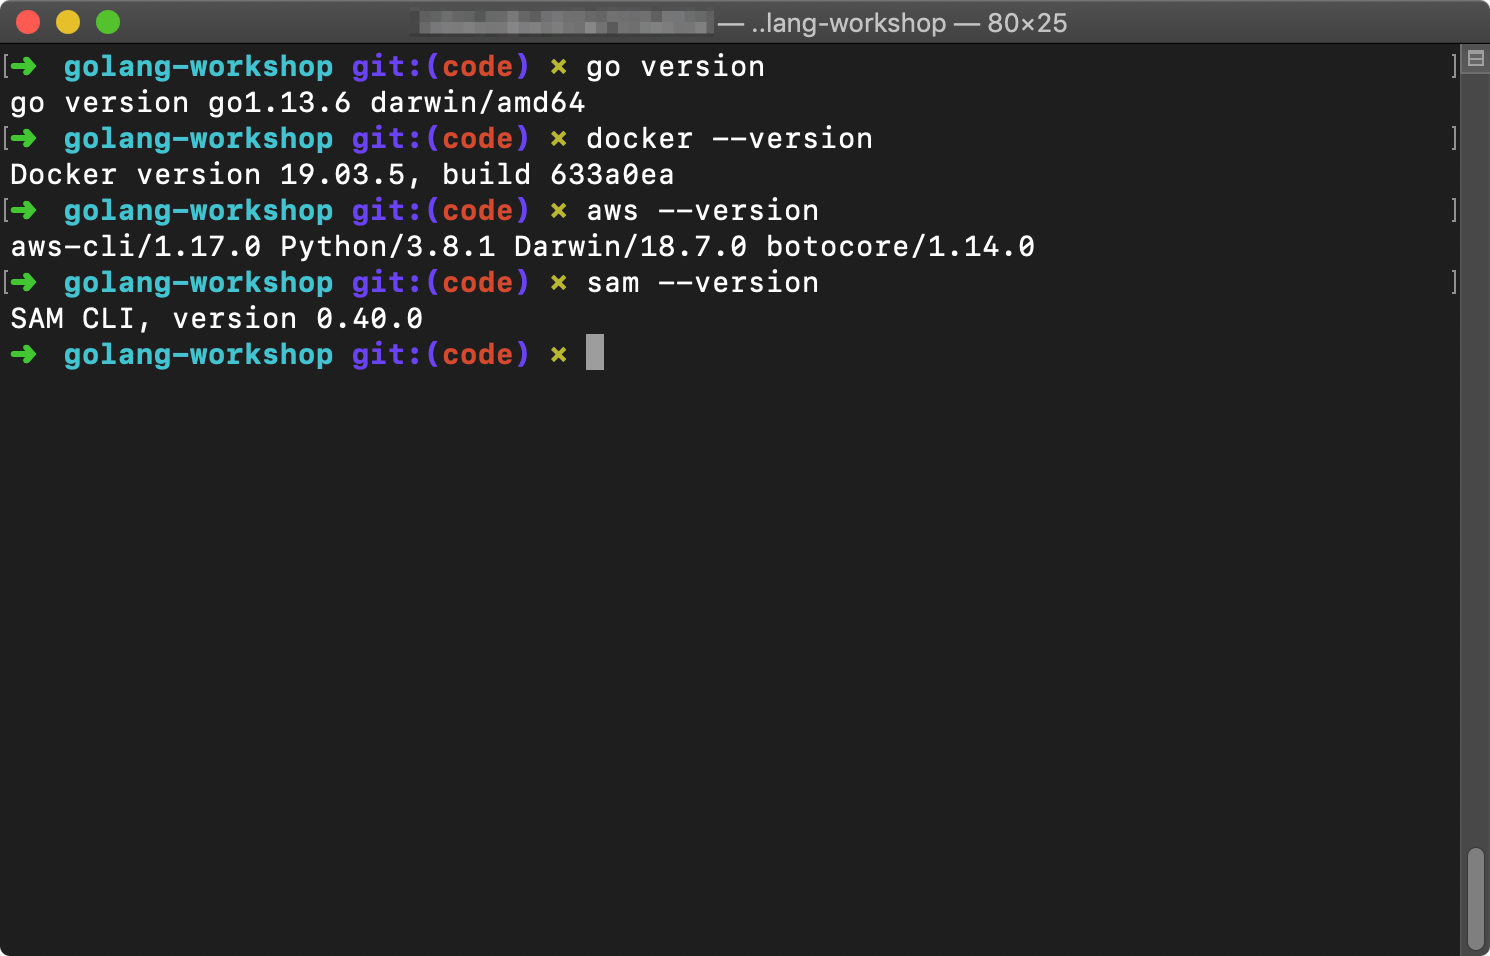 Terminal showing results of 'go version', 'docker --version', 'aws --version', and 'sam --version' commands.